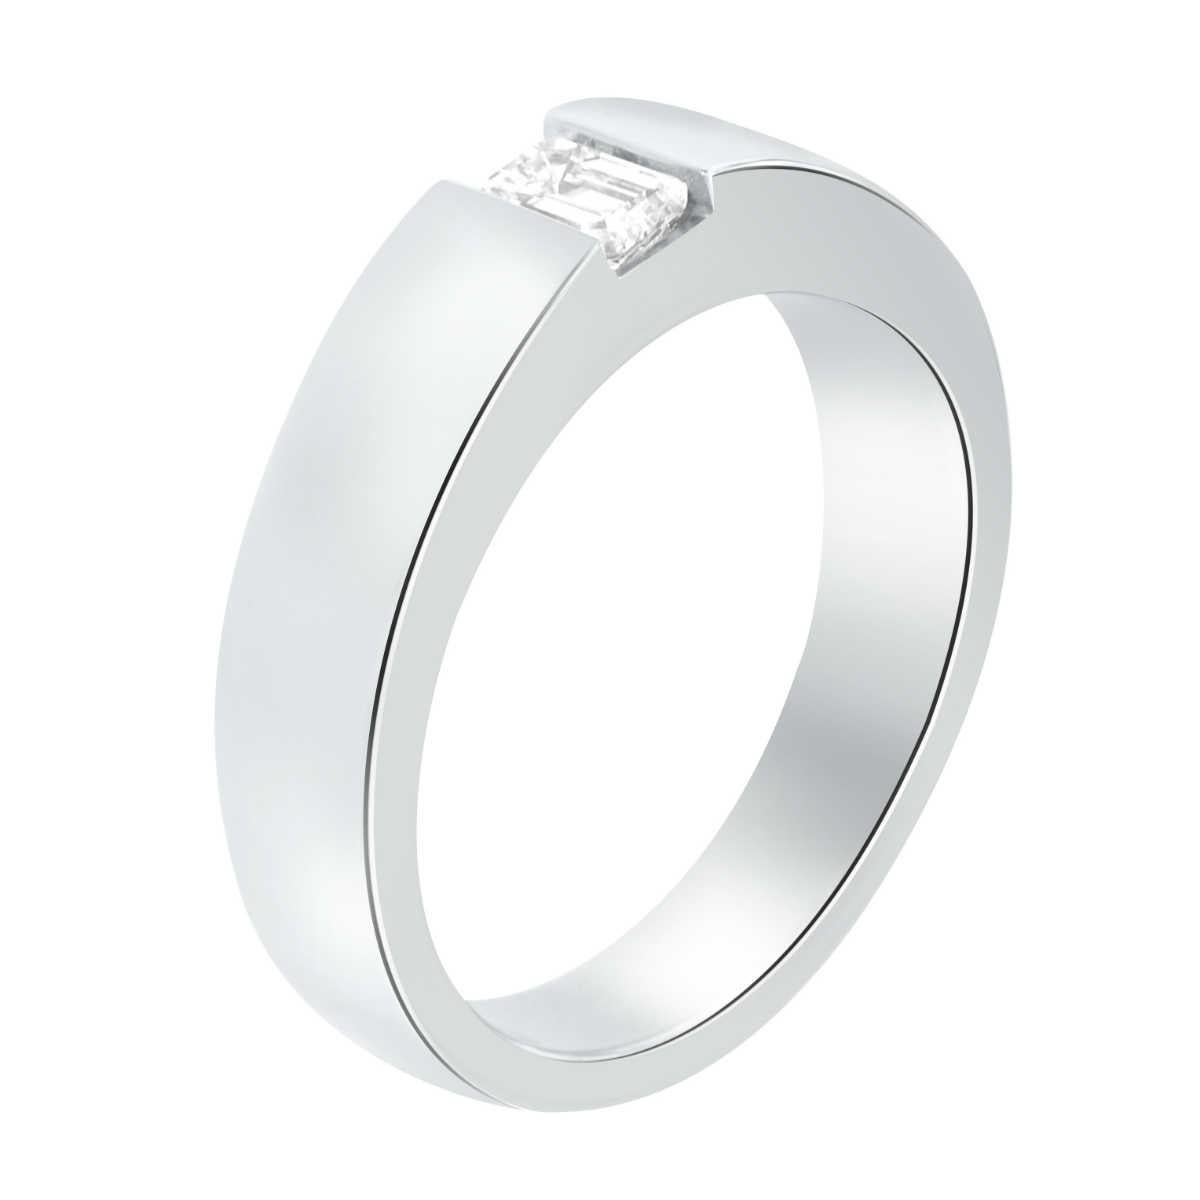 This 18k white gold handcrafted Men's band showcases a single Emerald Cut diamond on a seven (7) MM wide band. The band has a satin finish and comfort fit.

Diamond Weight : 0.30 Carats
Diamond Color: G
Diamond Clarity: VS2
Finger size : 10